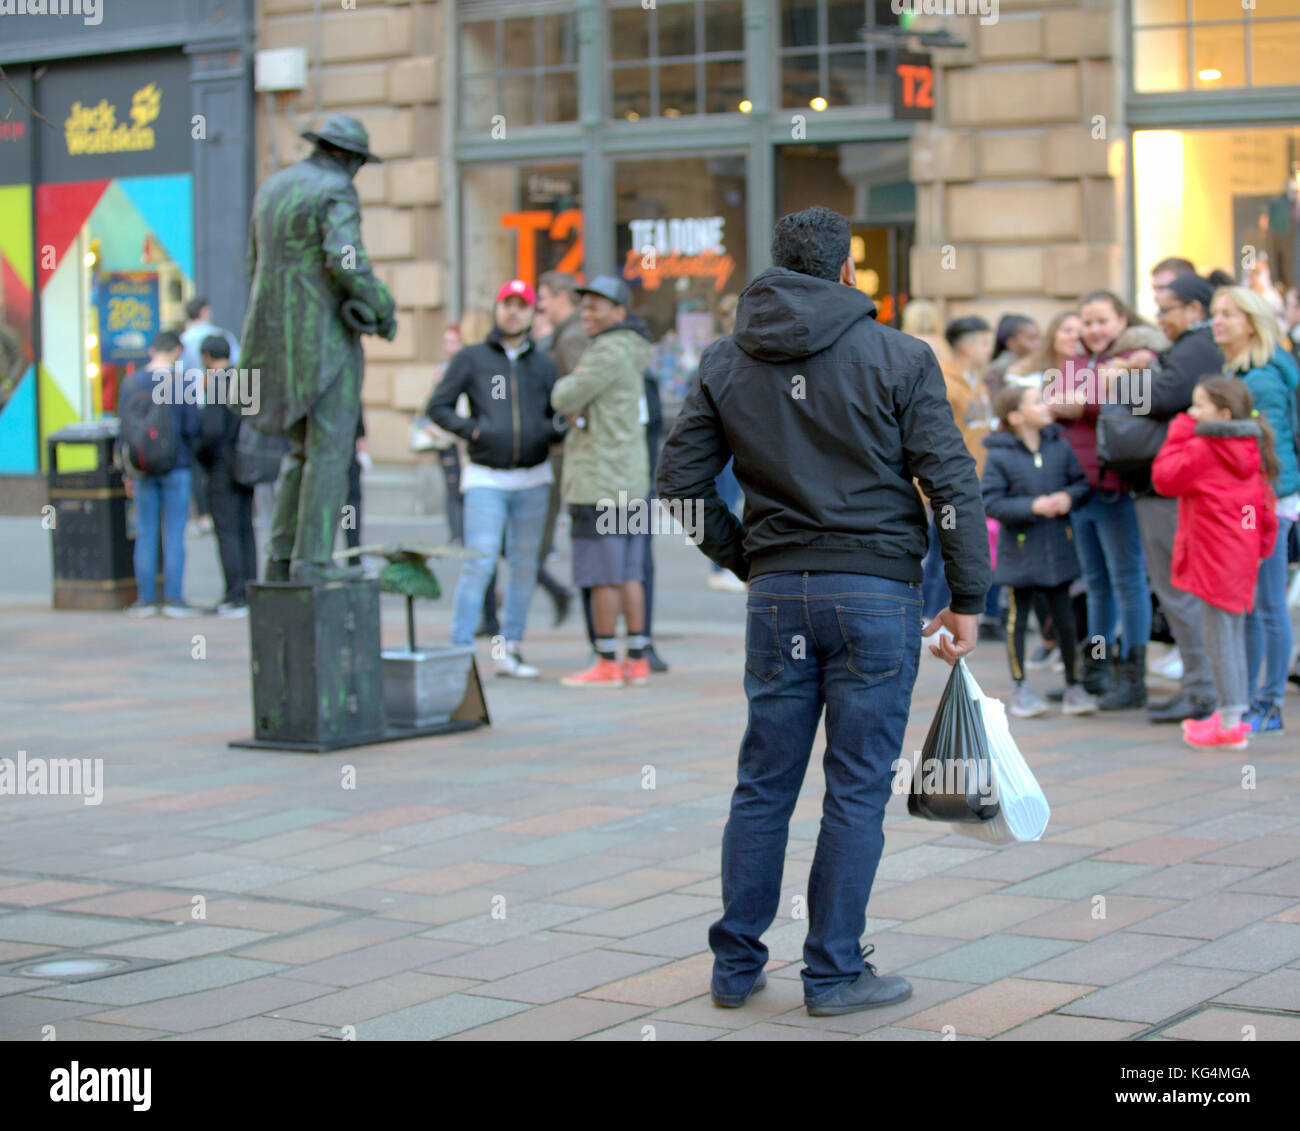 street performer living statue with a posing spectator in crowd on the style mile Glasgow buchanan street viewed from behind Stock Photo